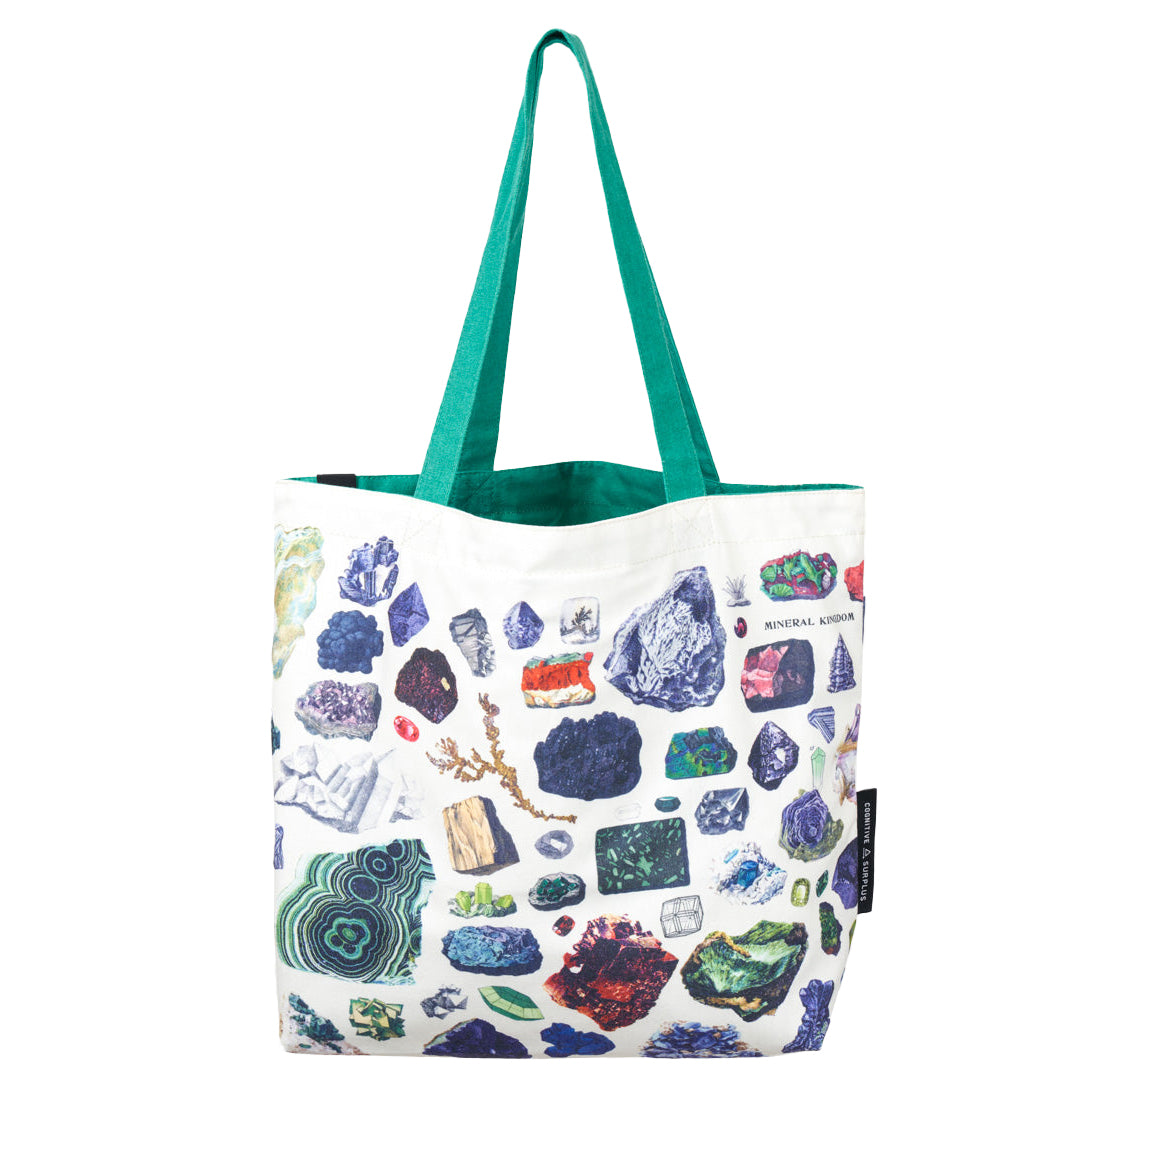 Gems & Minerals Tote Bag | Field Museum Store